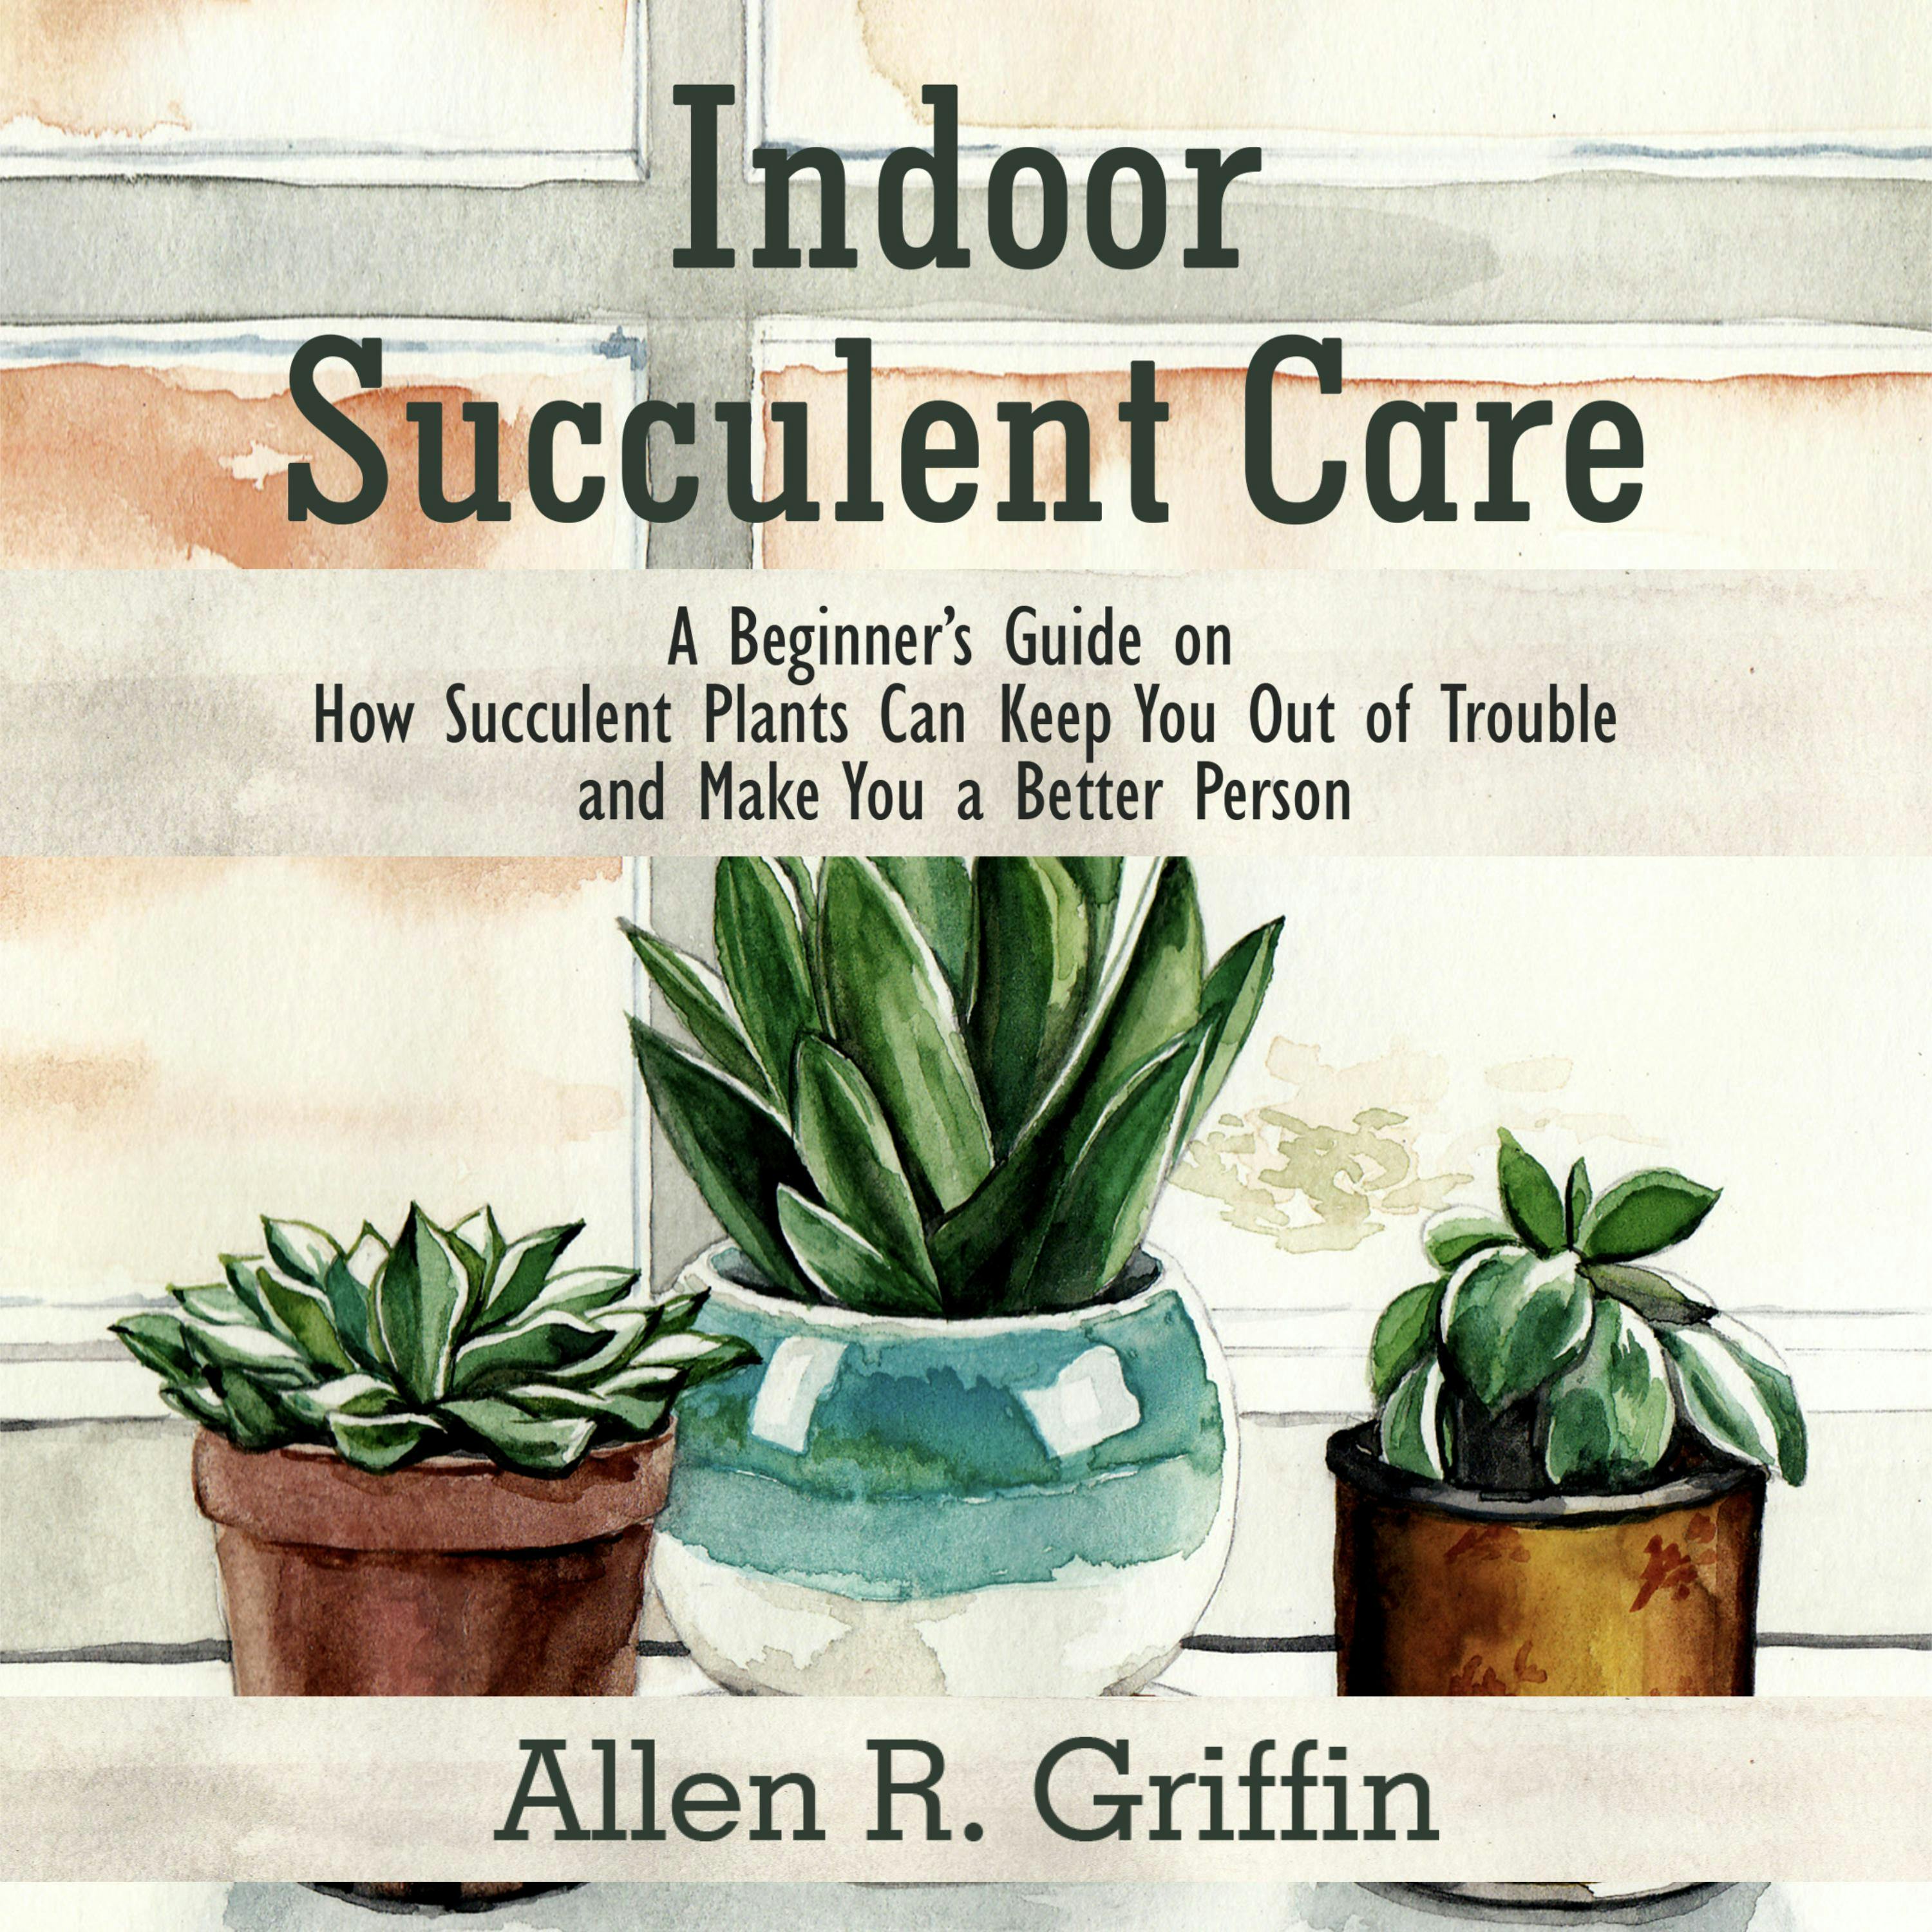 Indoor Succulent Care: A Beginner's Guide on How Succulent Plants Can Keep You Out of Trouble and Make You a Better Person - Allen R. Griffin